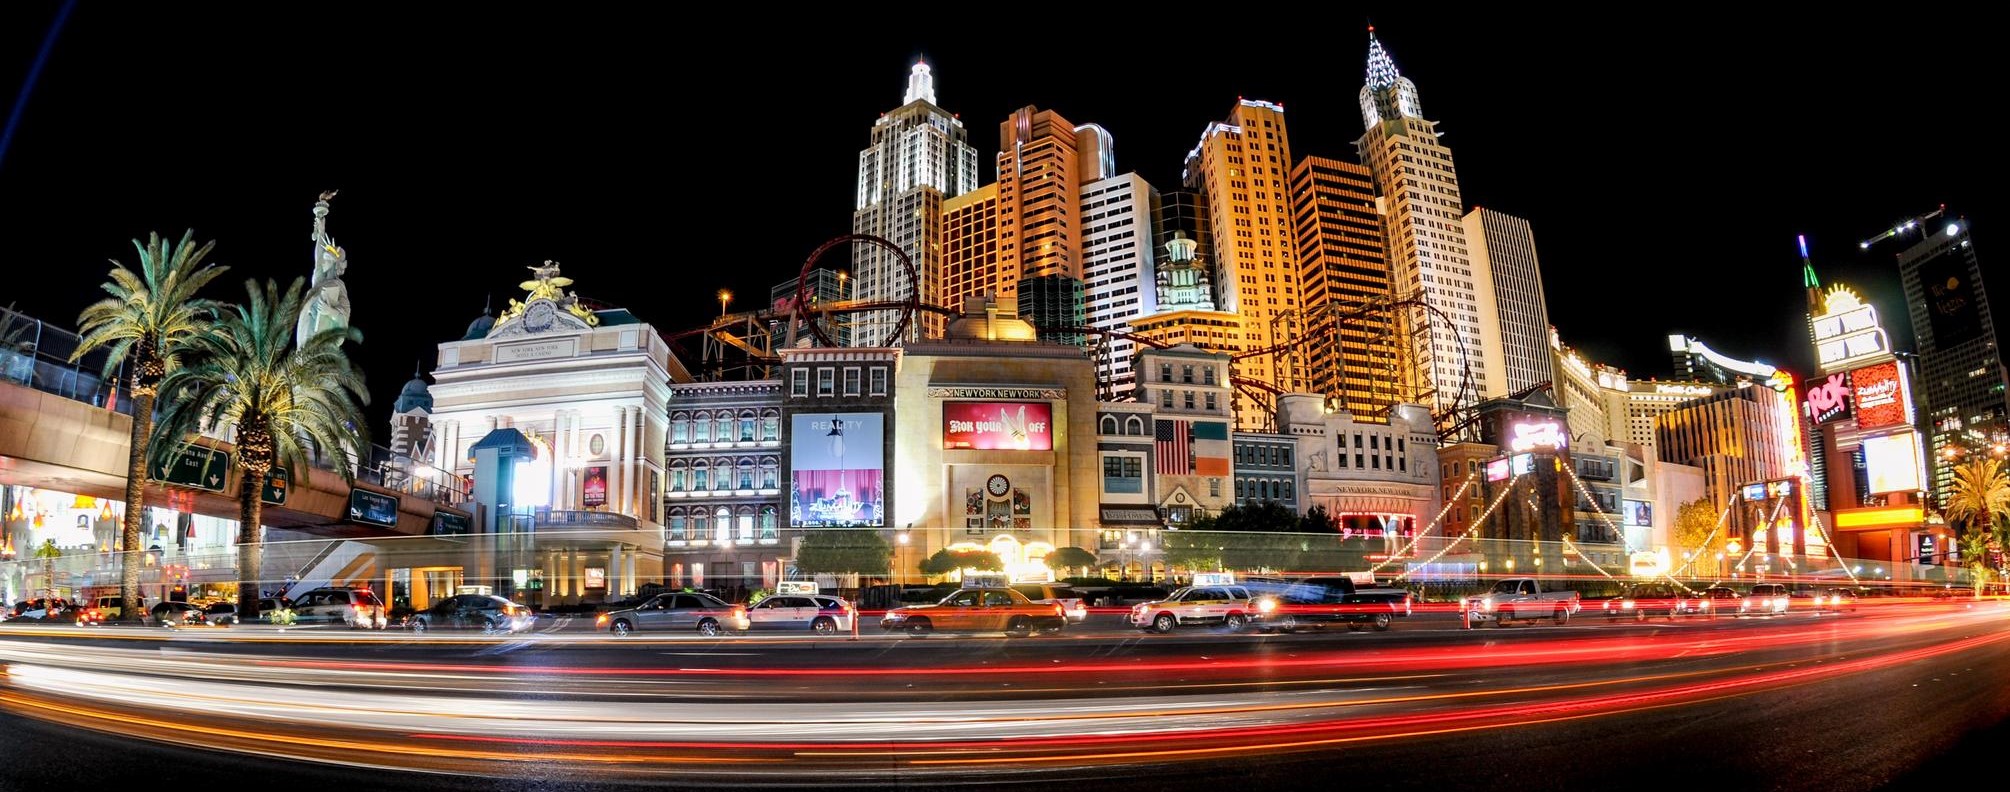 The Las Vegas strip with bright lights at night